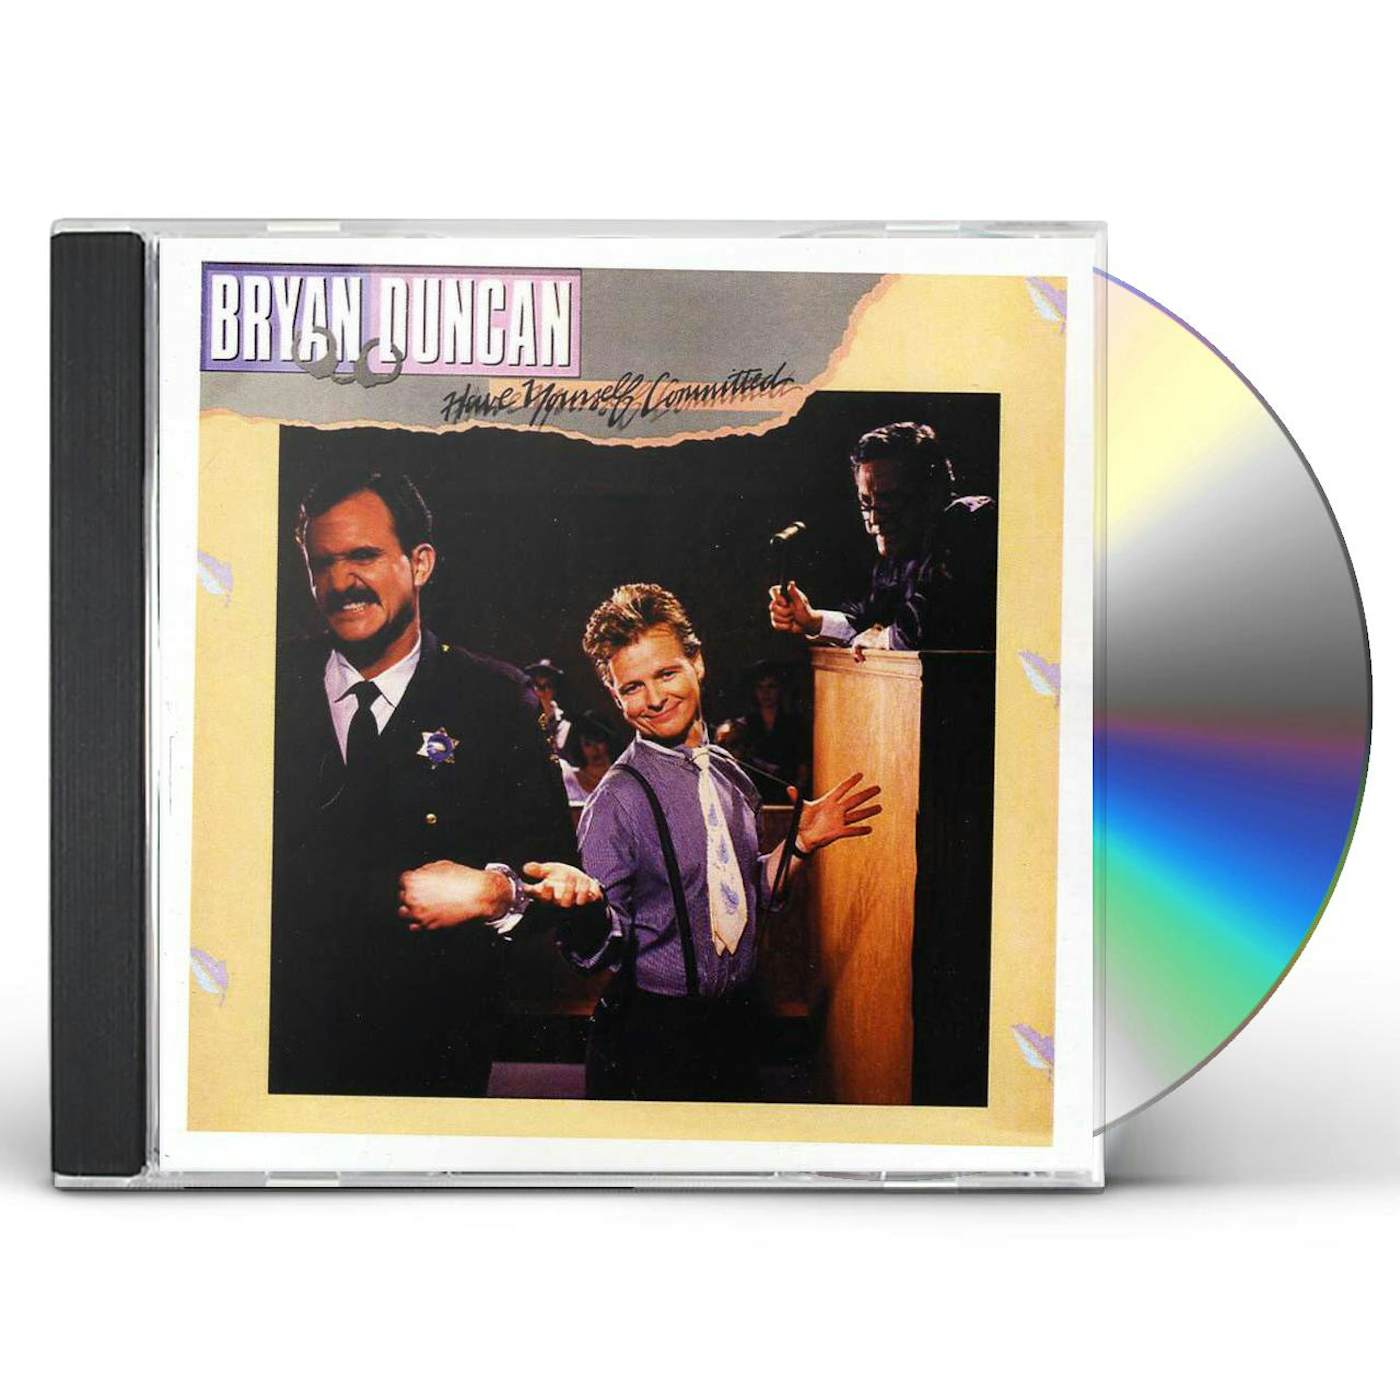 Bryan Duncan HAVE YOURSELF COMMITTED CD